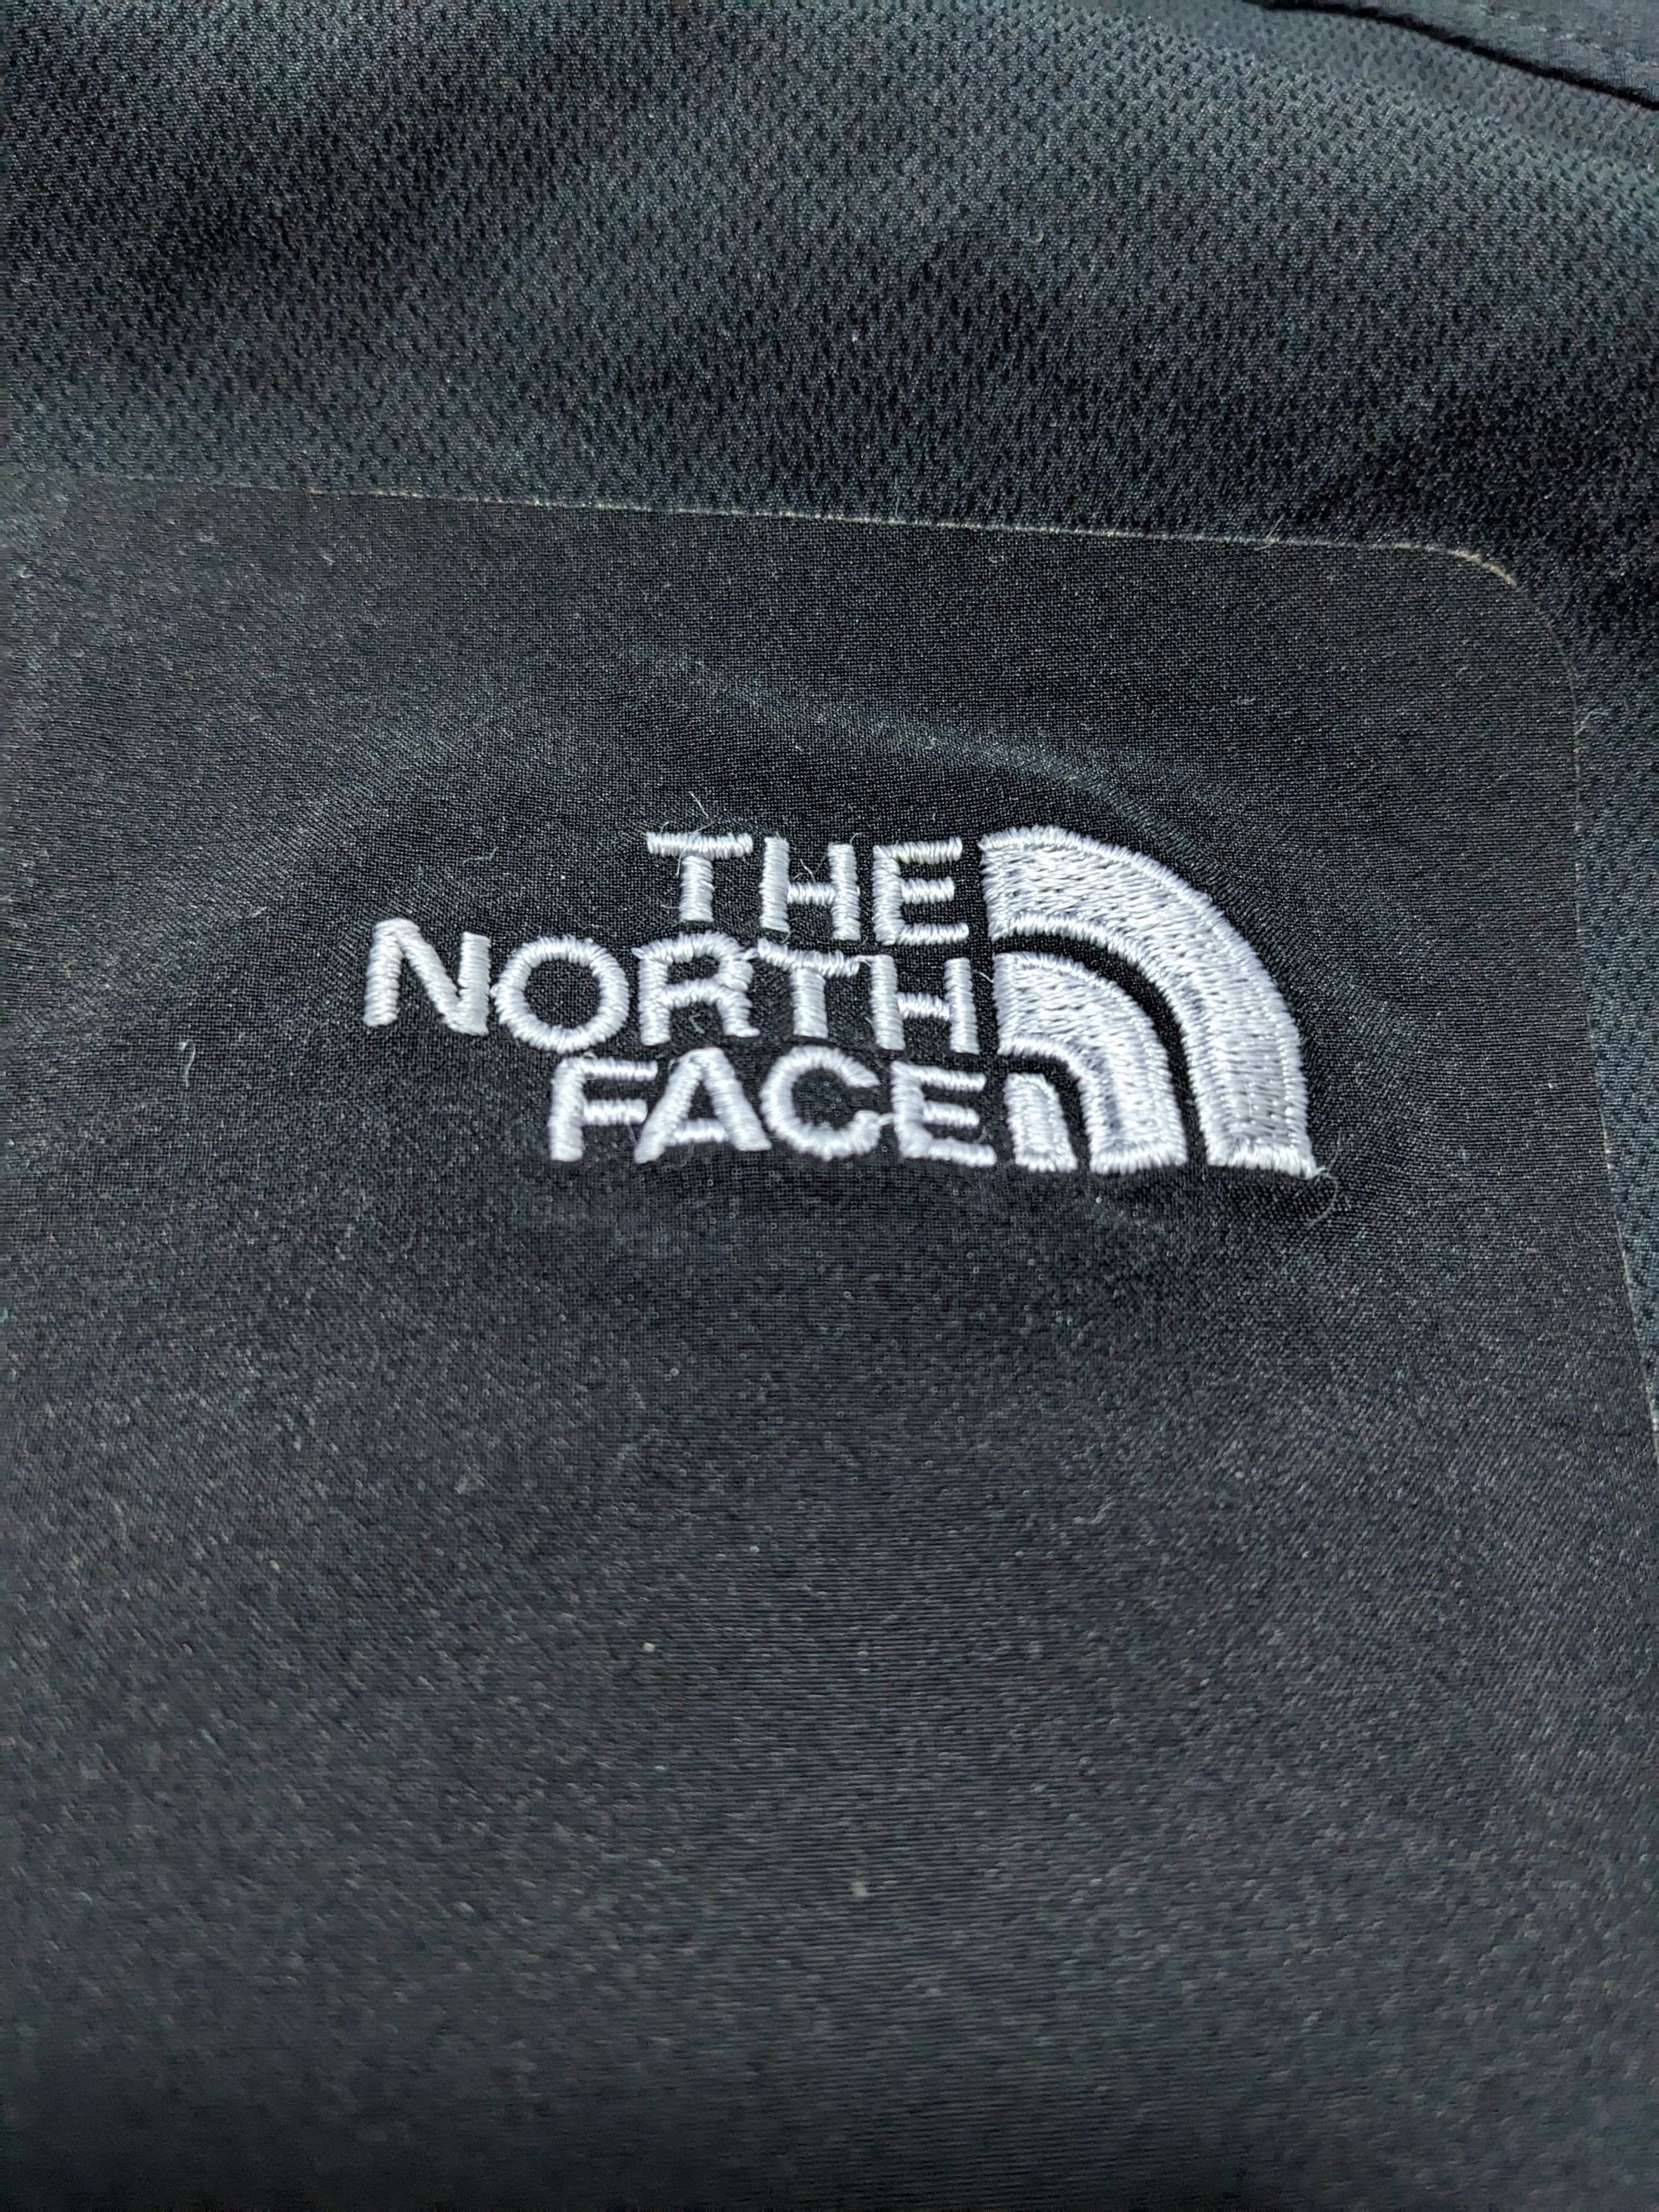 The North Face Soft Shell Black Vest - 3